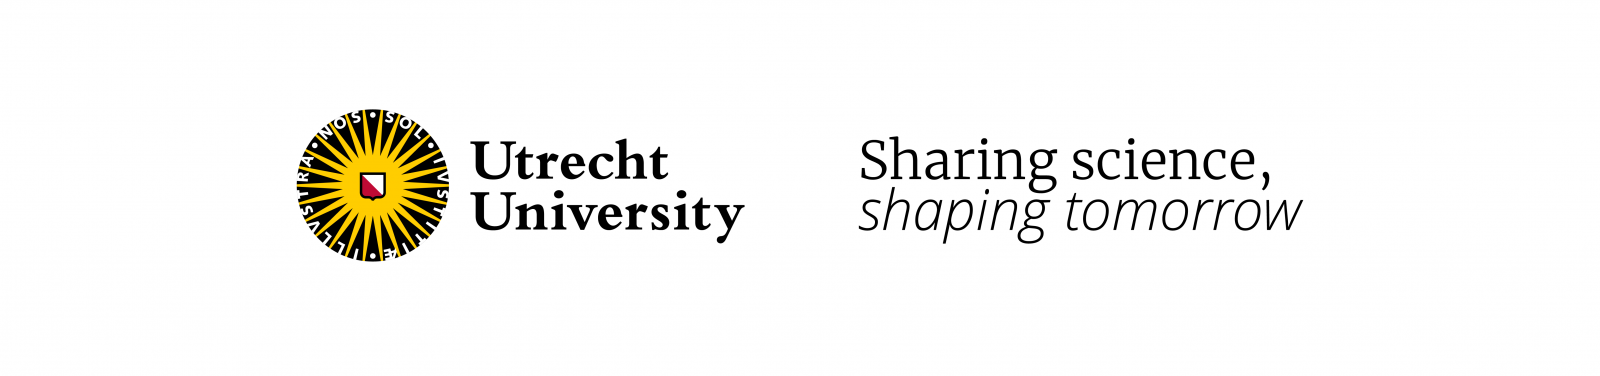 Large logo of Utrecht University with next to it the pay-off: Sharing science, shaping tomorrow.